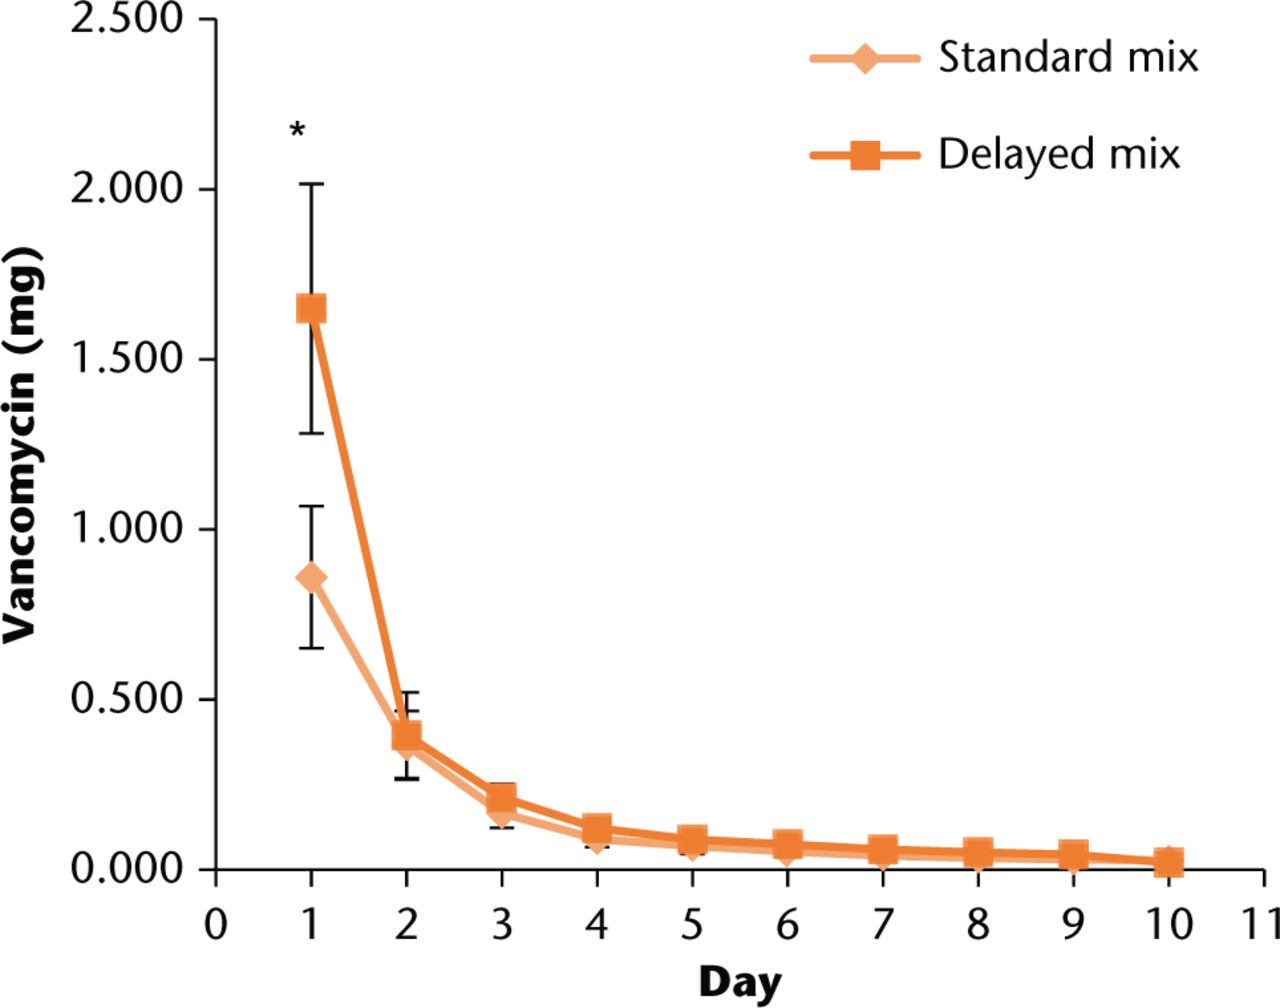 Fig. 1 
          Comparison of average daily elution profiles for normal and delayed mixing techniques during Phase I. Error bars indicate +/- one standard deviation. *t-test significance of p < 0.001
        